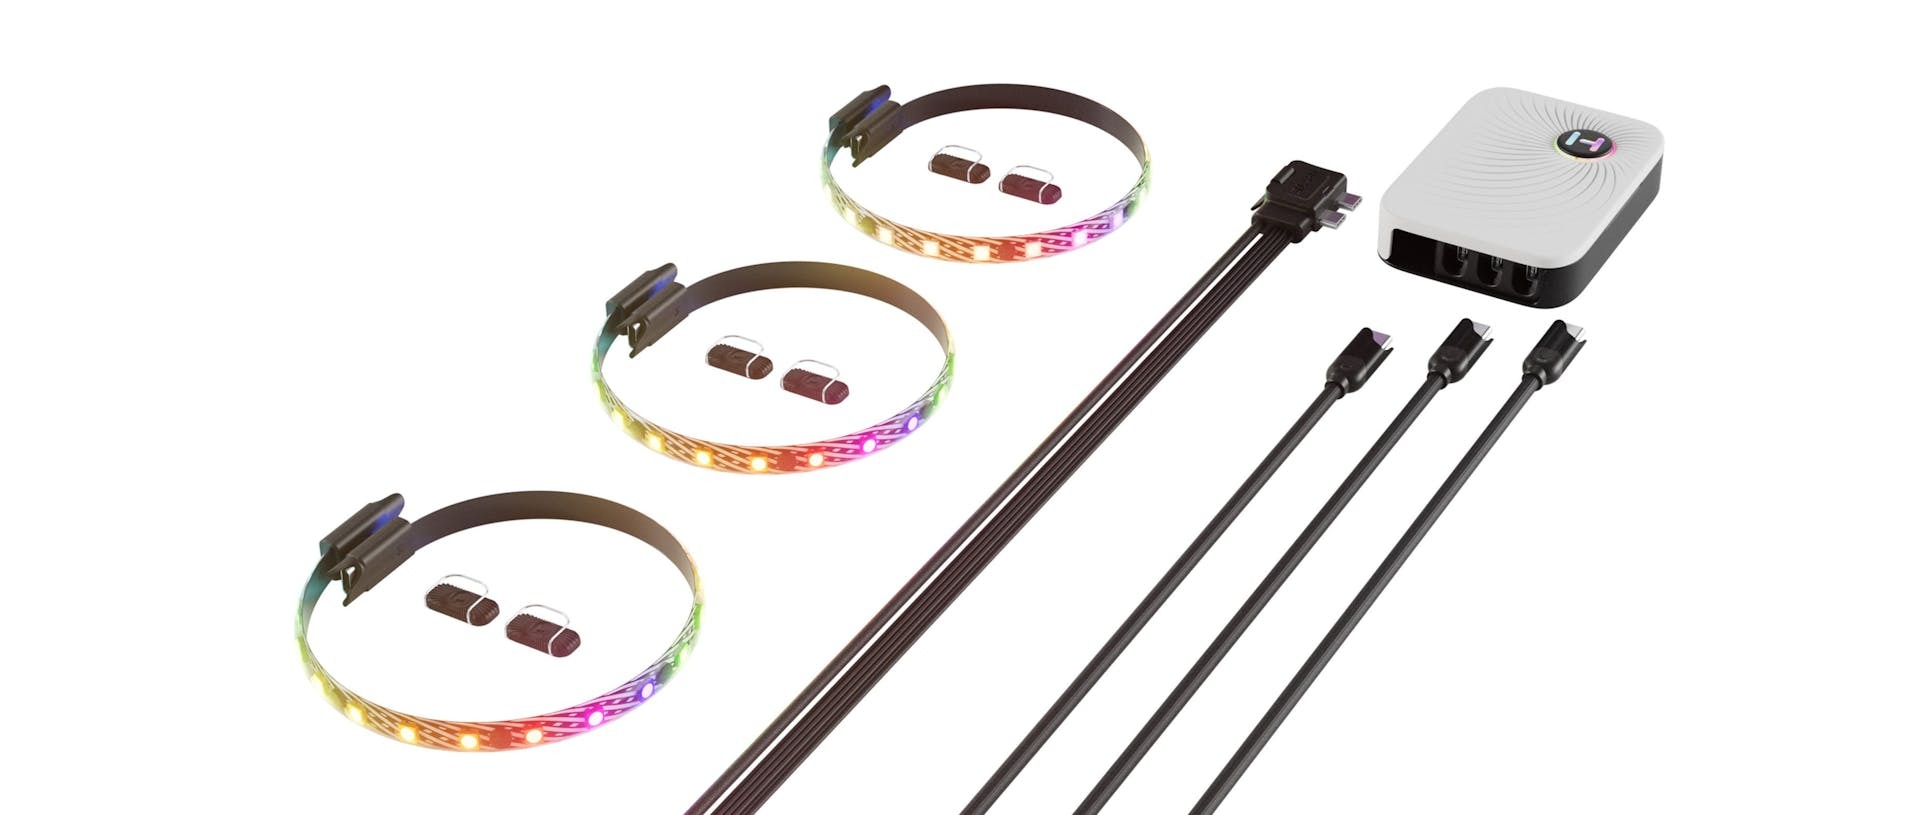 HYTE LS10 LED Strip 3 Pack with NP50